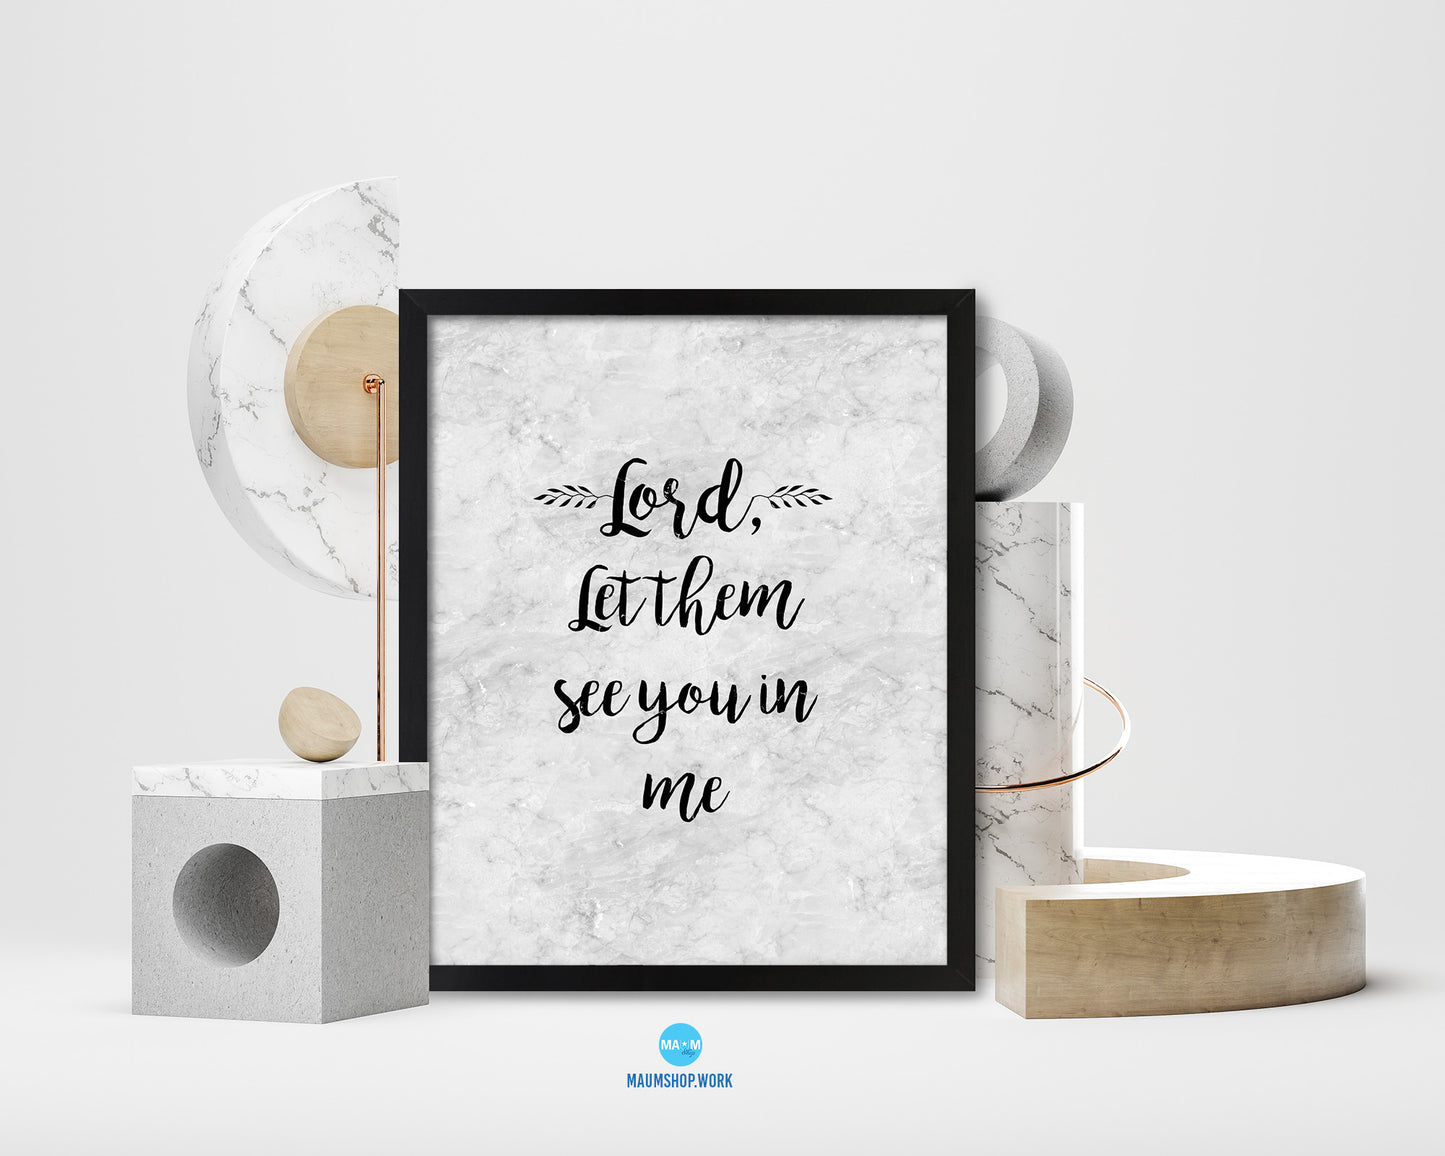 Lord, let them see you in me Bible Scripture Verse Framed Print Wall Art Decor Gifts